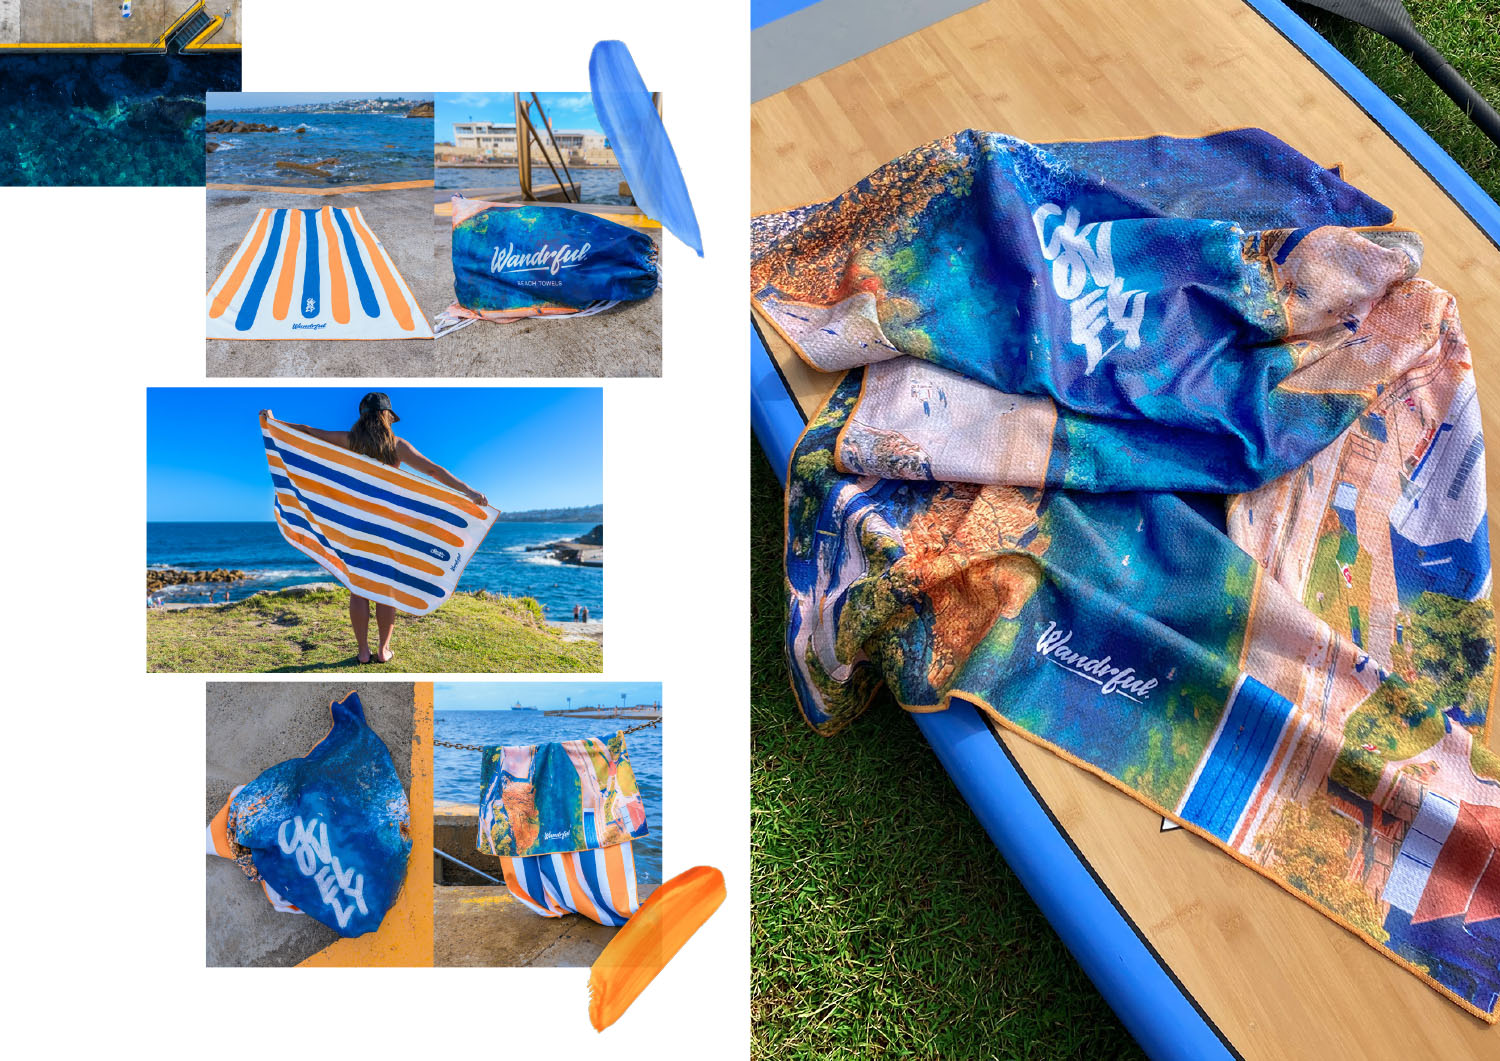 Wandrful sand-free beach towels at Clovelly Beach. Model using sand-free beach towel.